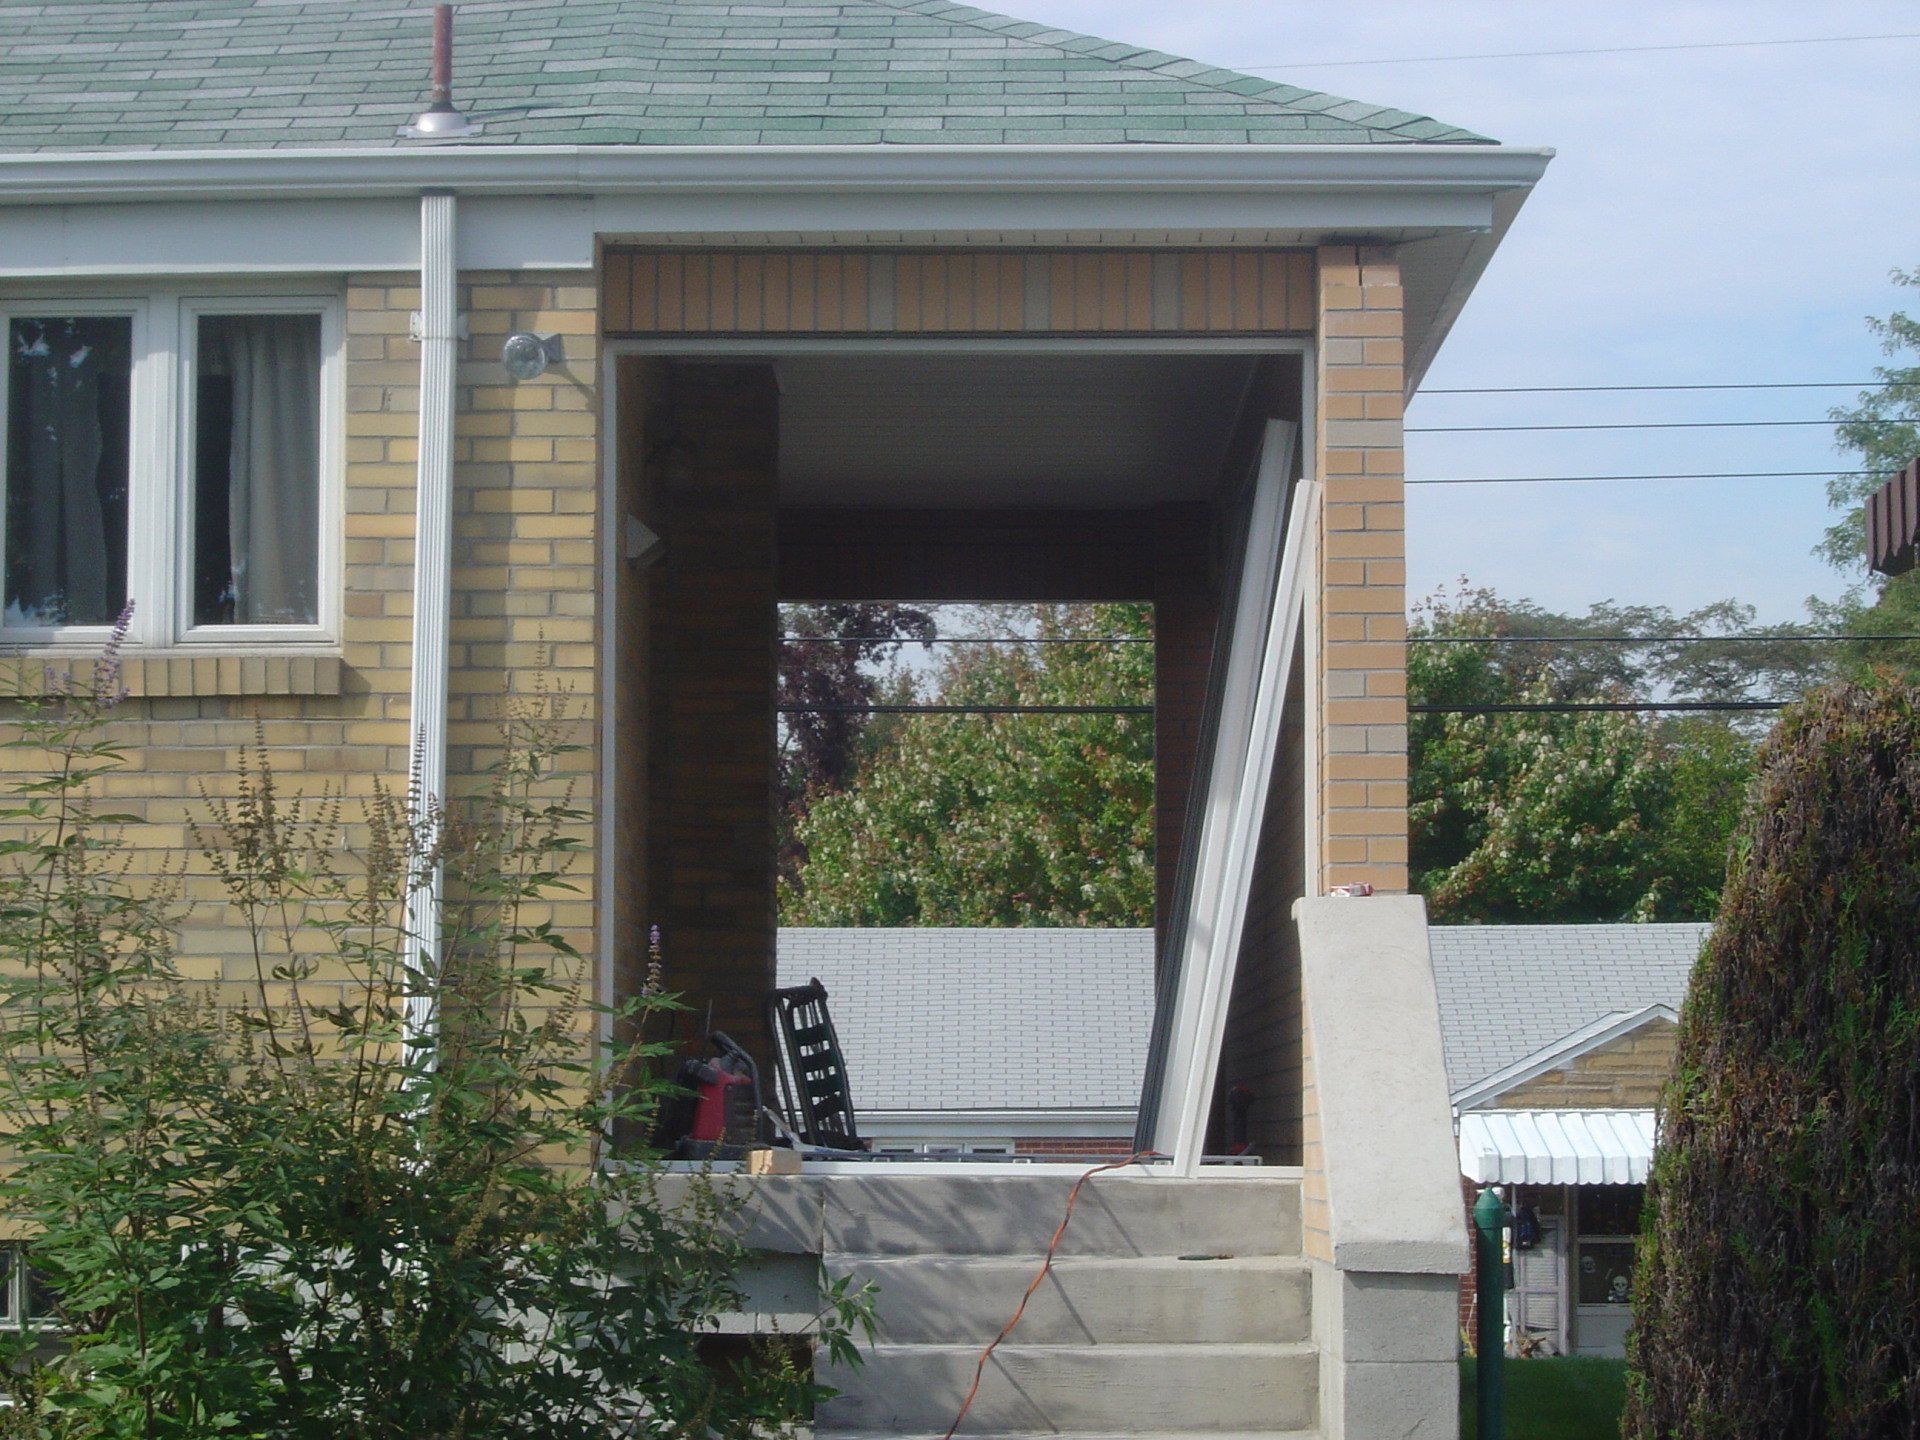 A brick house with stairs leading up to a porch